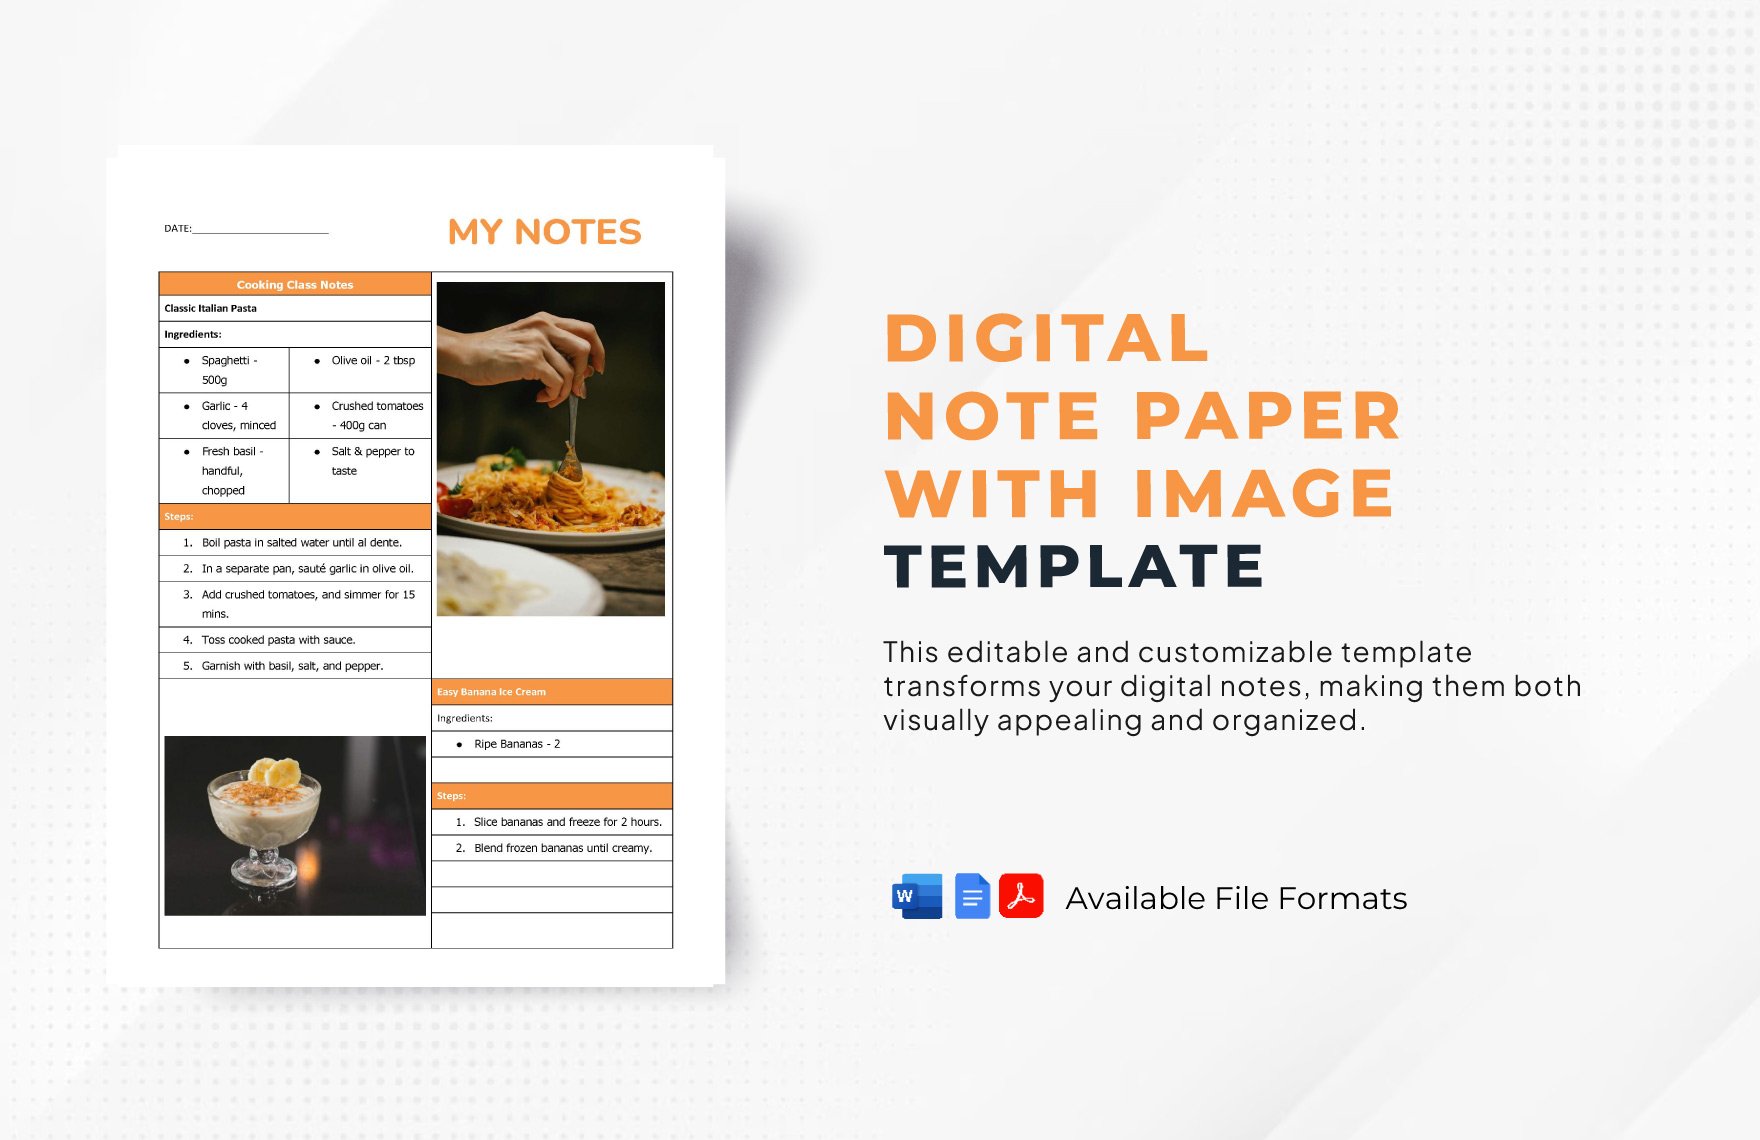 Digital Note Paper with Image Template